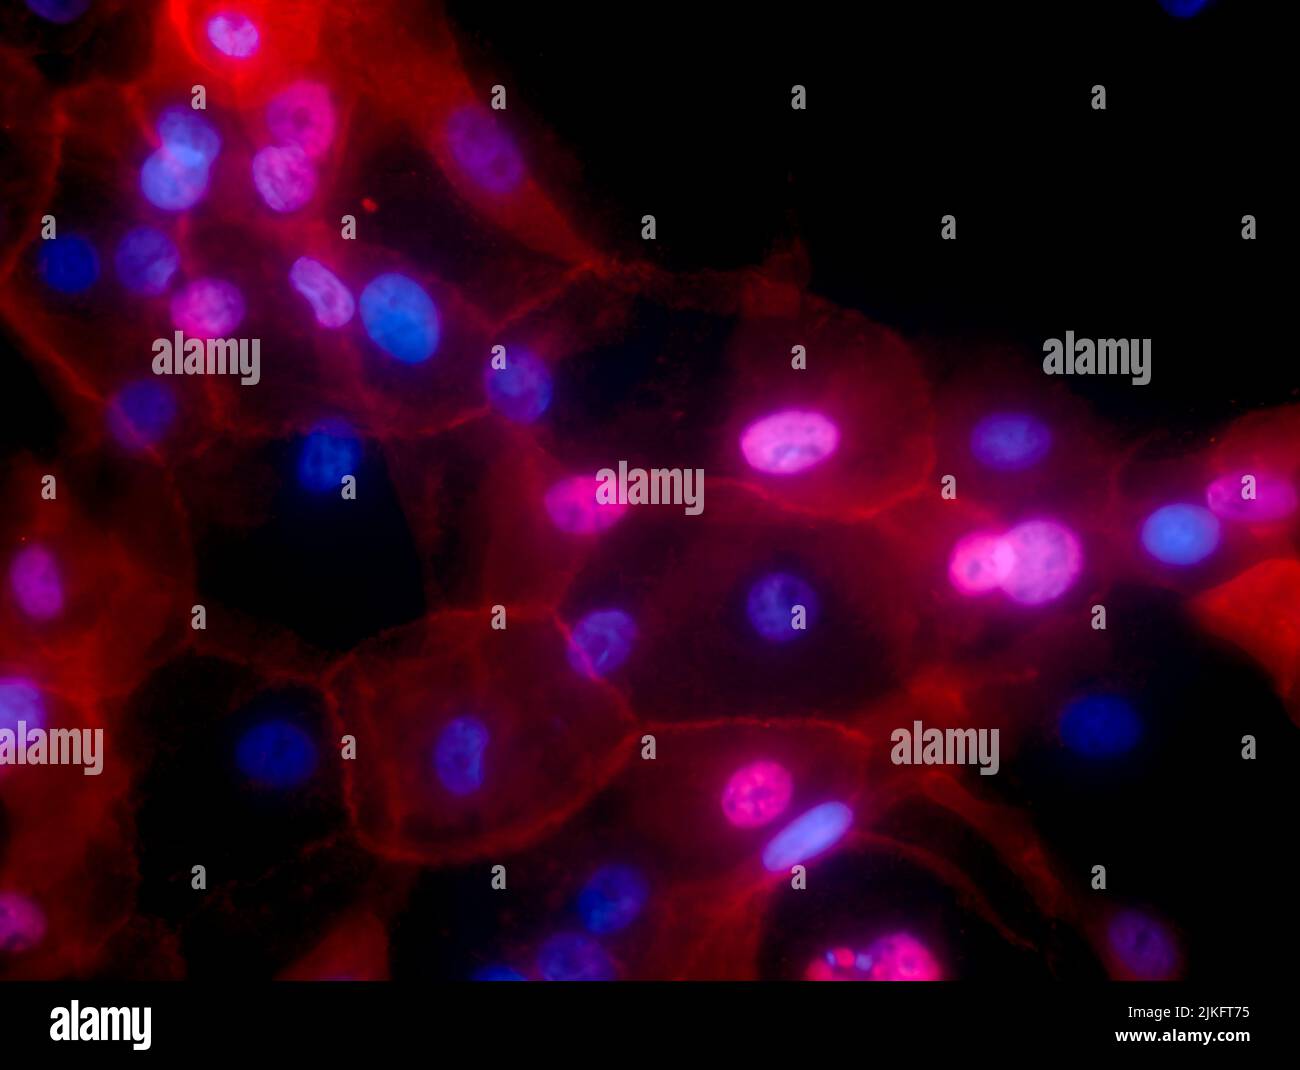 The image shows a cell culture of conditionally reprogrammed human breast cancer cells. The fluorescent red color represents MHC-I and the nuclei are shown in blue. Stock Photo